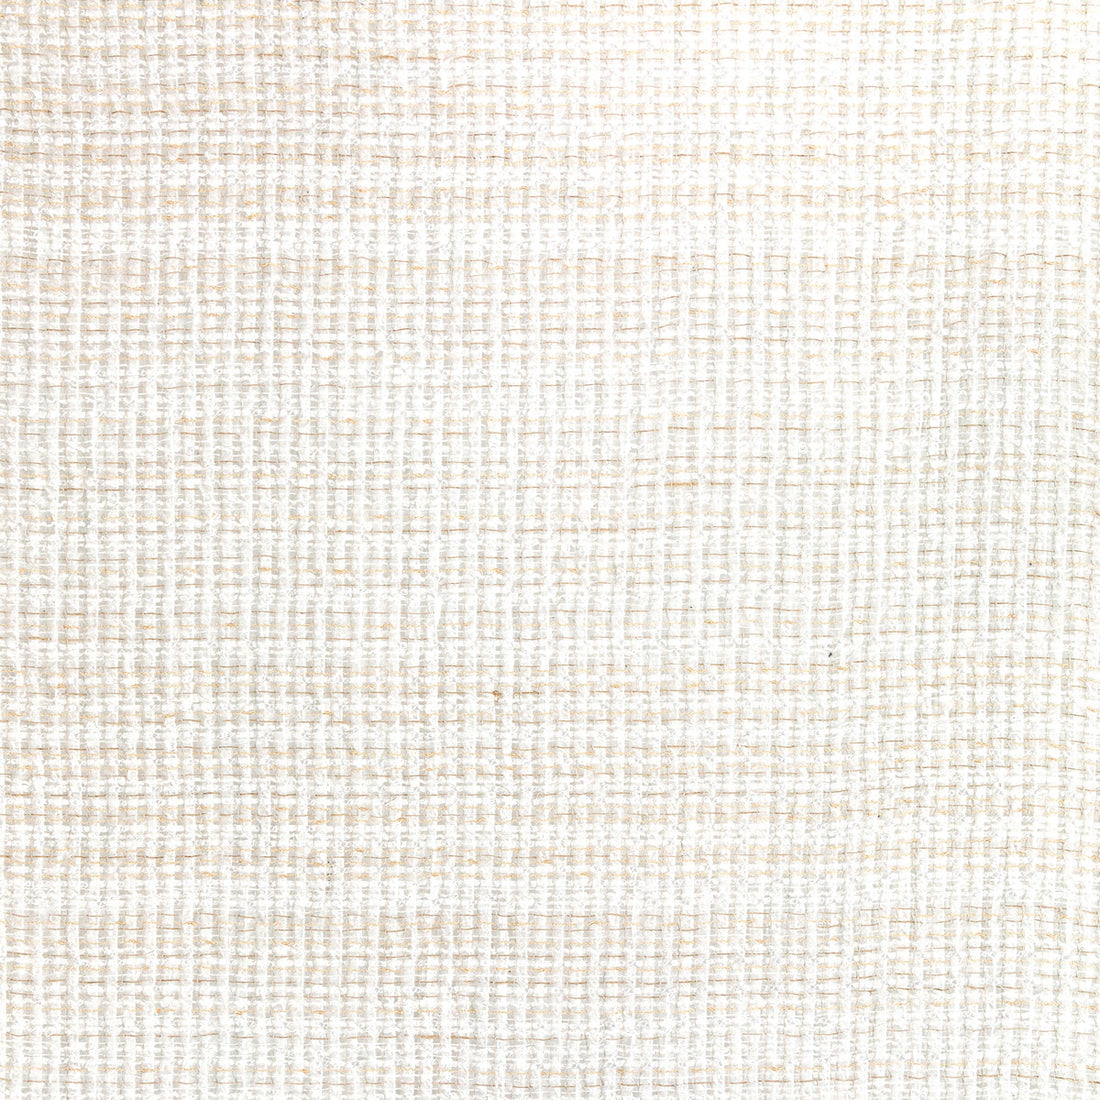 Soft Spoken fabric in white sand color - pattern 4889.1.0 - by Kravet Couture in the Modern Luxe III collection